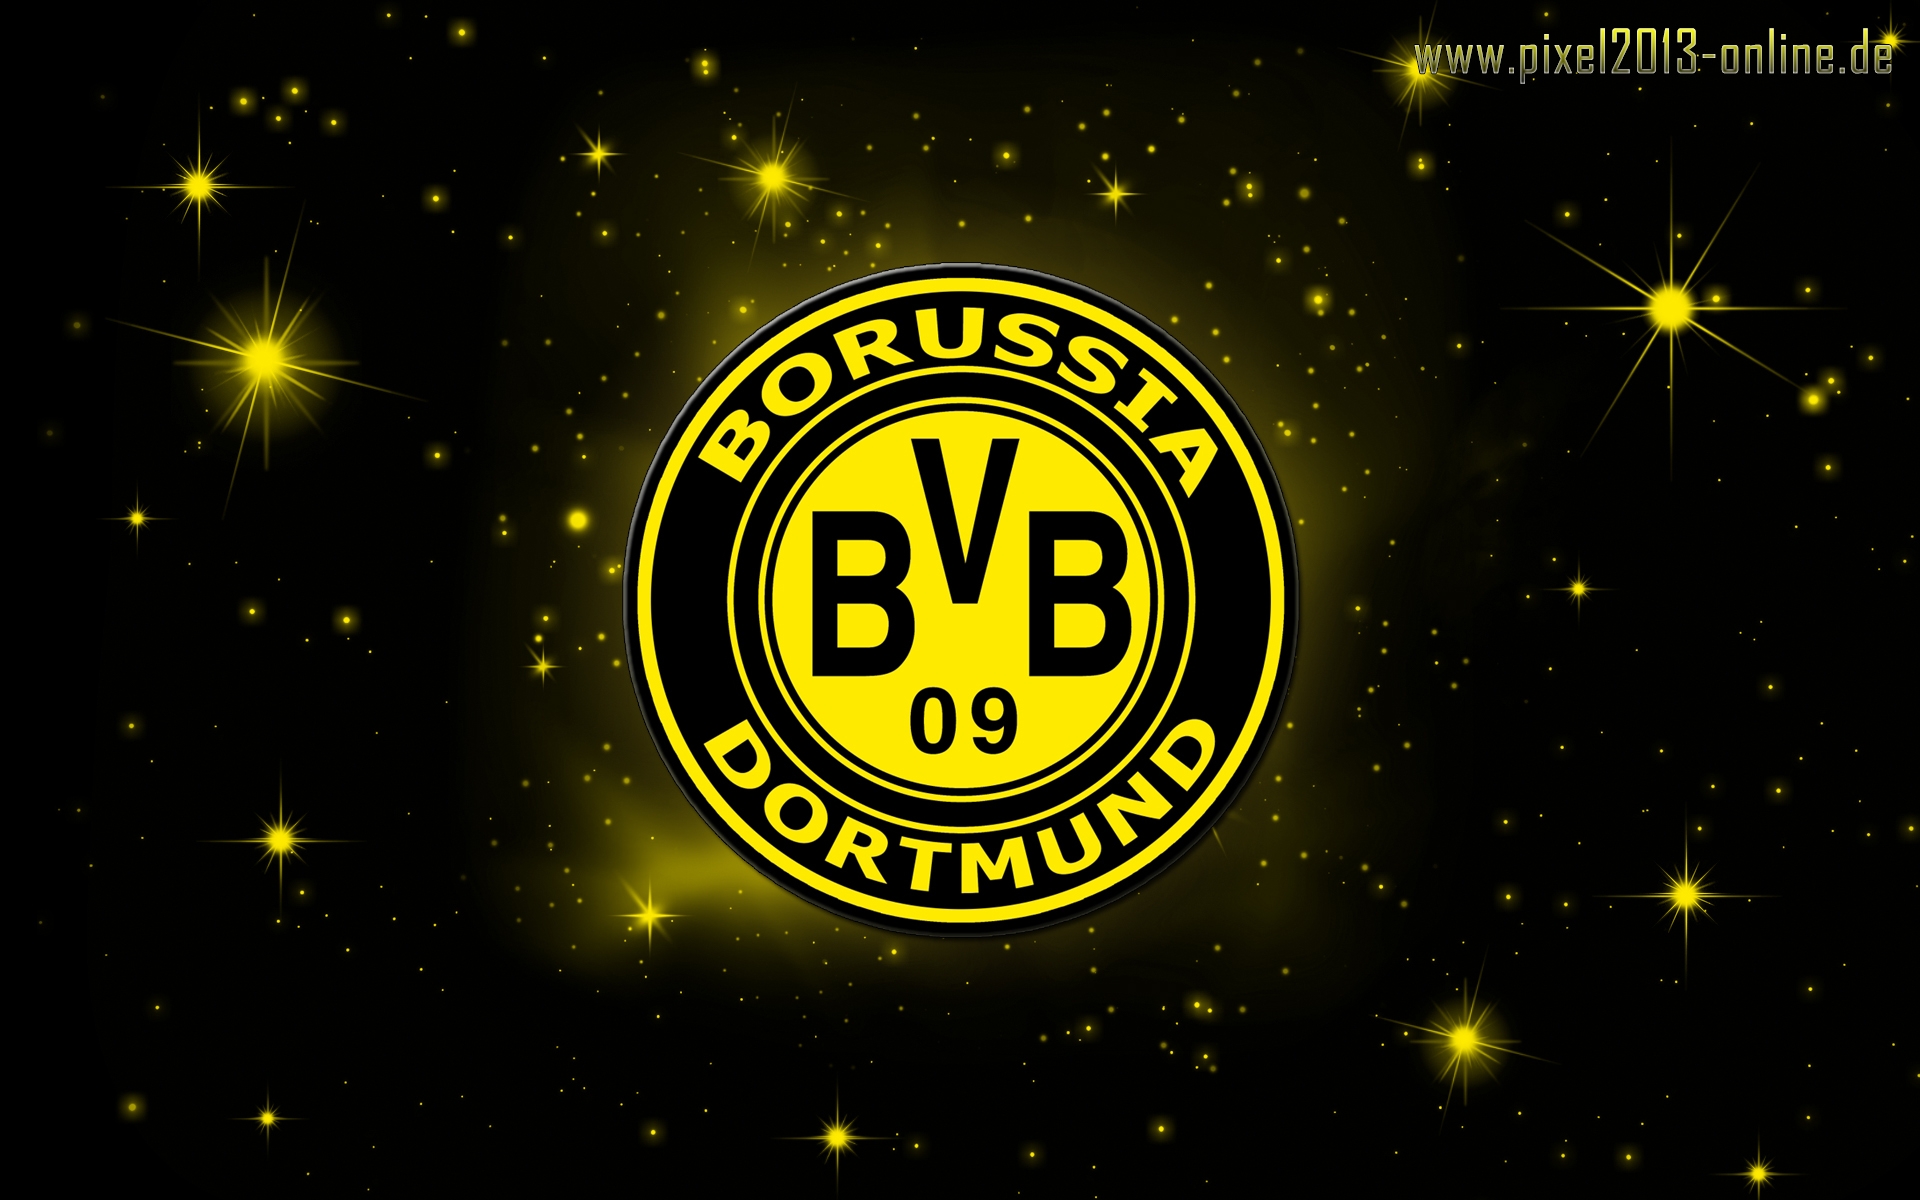 Free Download Borussia Dortmund Football Wallpaper Backgrounds And Picture 19x10 For Your Desktop Mobile Tablet Explore 99 Borussia Dortmund Wallpapers Borussia Dortmund Wallpapers Mario Gotze Borussia Dortmund Wallpapers Dortmund City